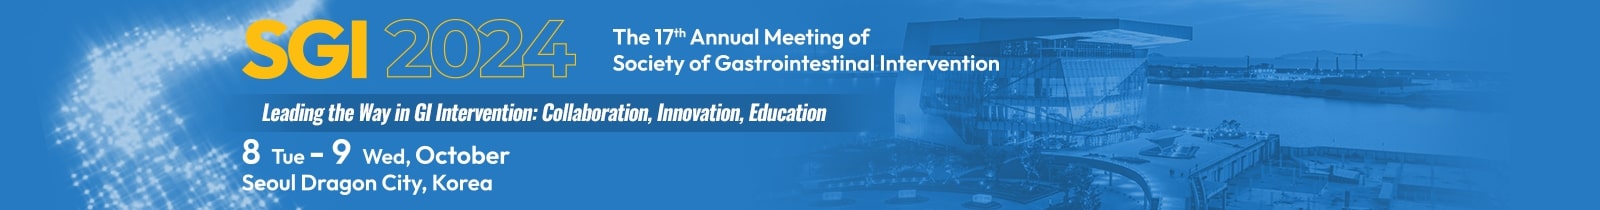 SGI 2024 The 17th Annual Meeting of Society of Gastrointestinal Intervention